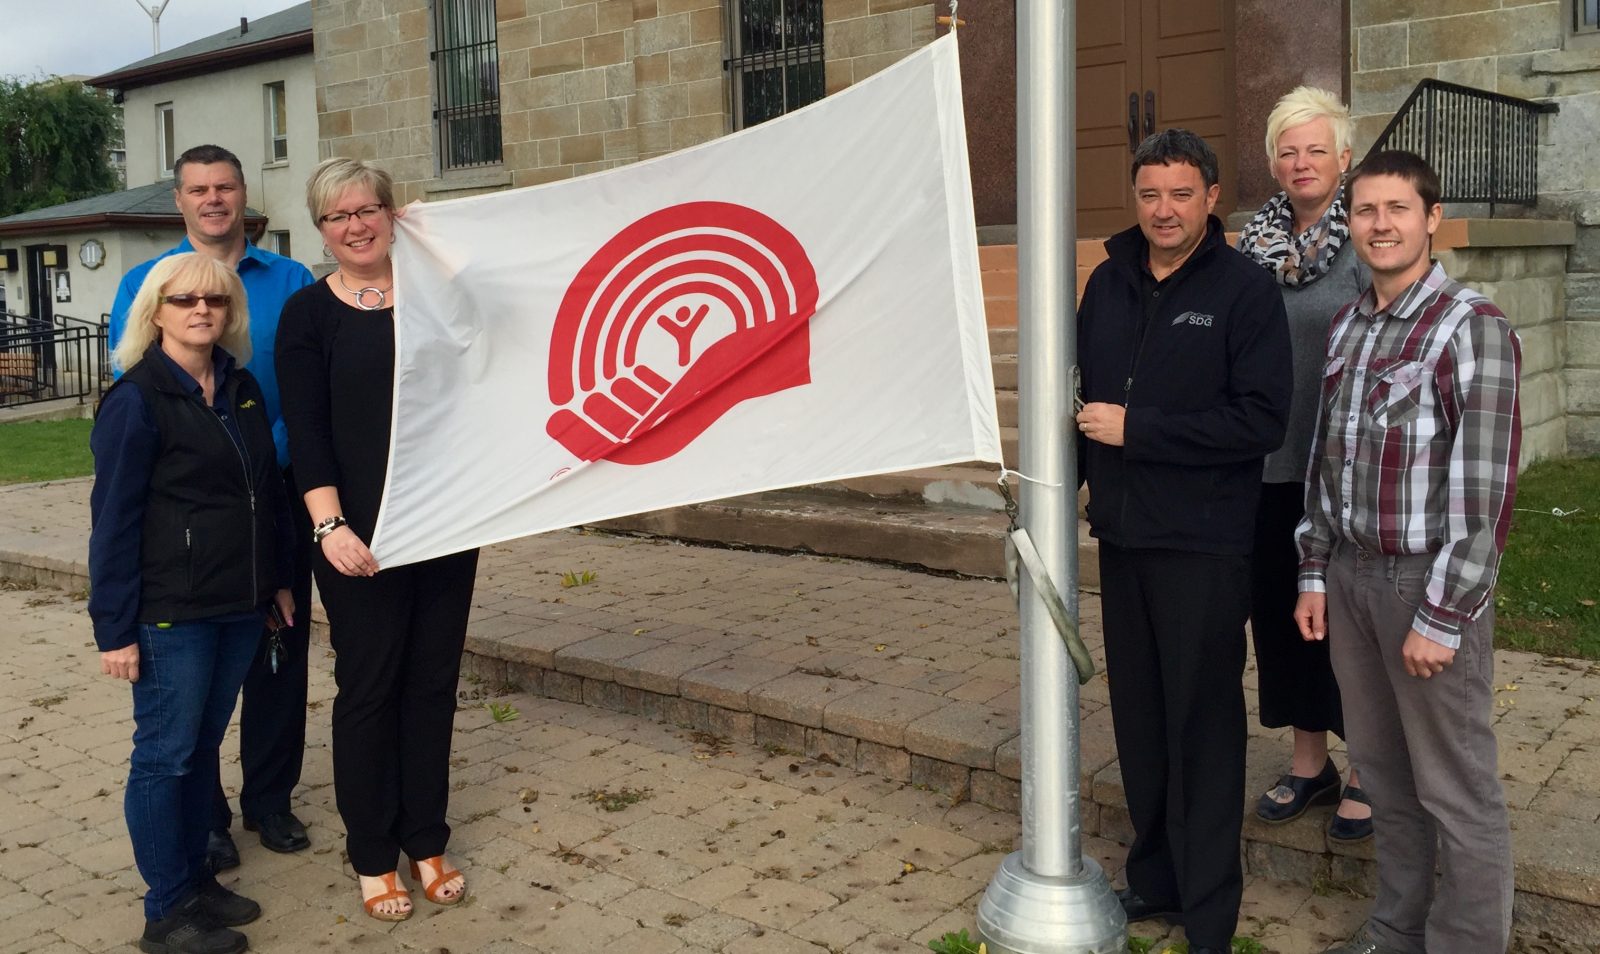 United Counties of SDG raises United Way/Centraide SD&G flag